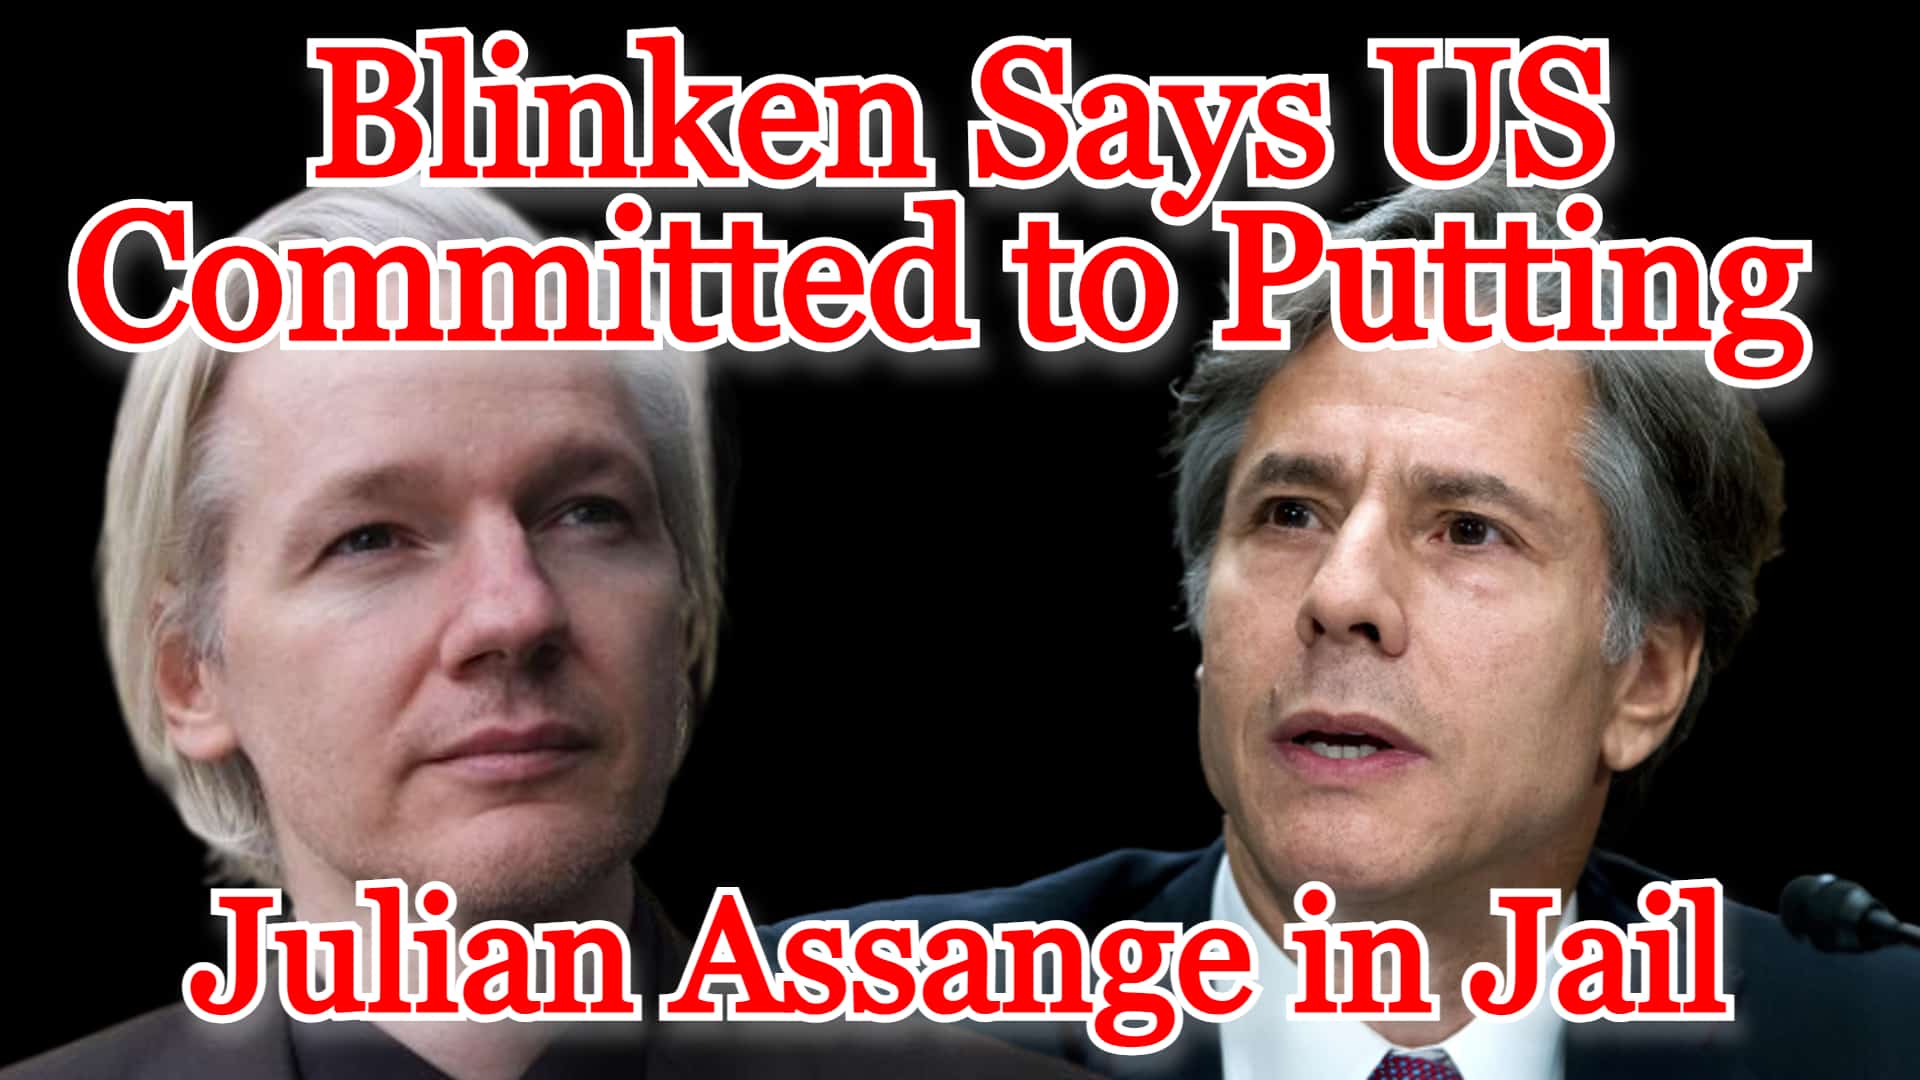 COI #453: Blinken Says US Committed to Putting Julian Assange in Jail